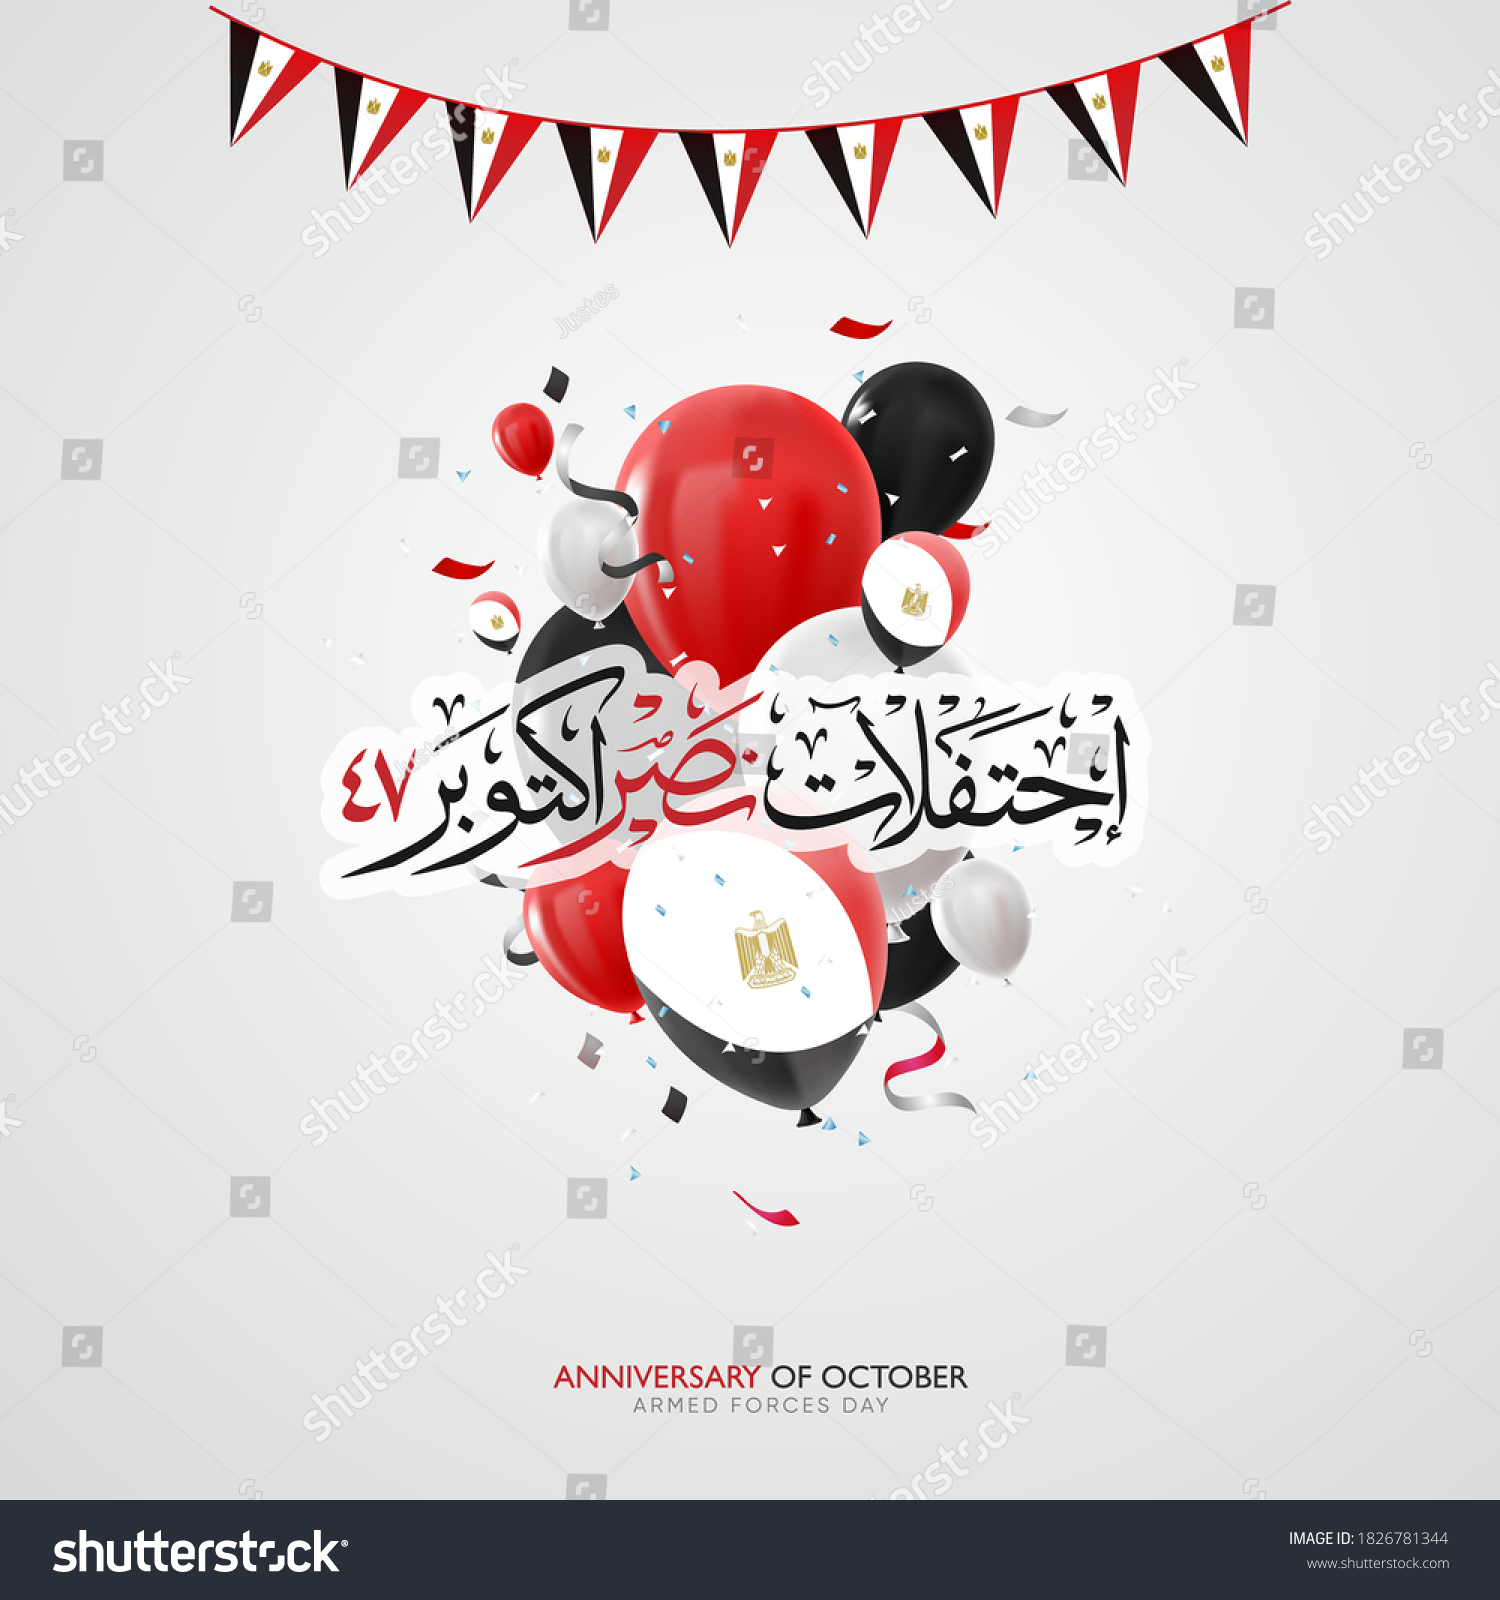 SVG of Greeting card for Anniversary of October and Armed Forces Day in 6 October 1973 - balloons flag - Egypt national day - Arabic calligraphy translation (The victory of October )  svg